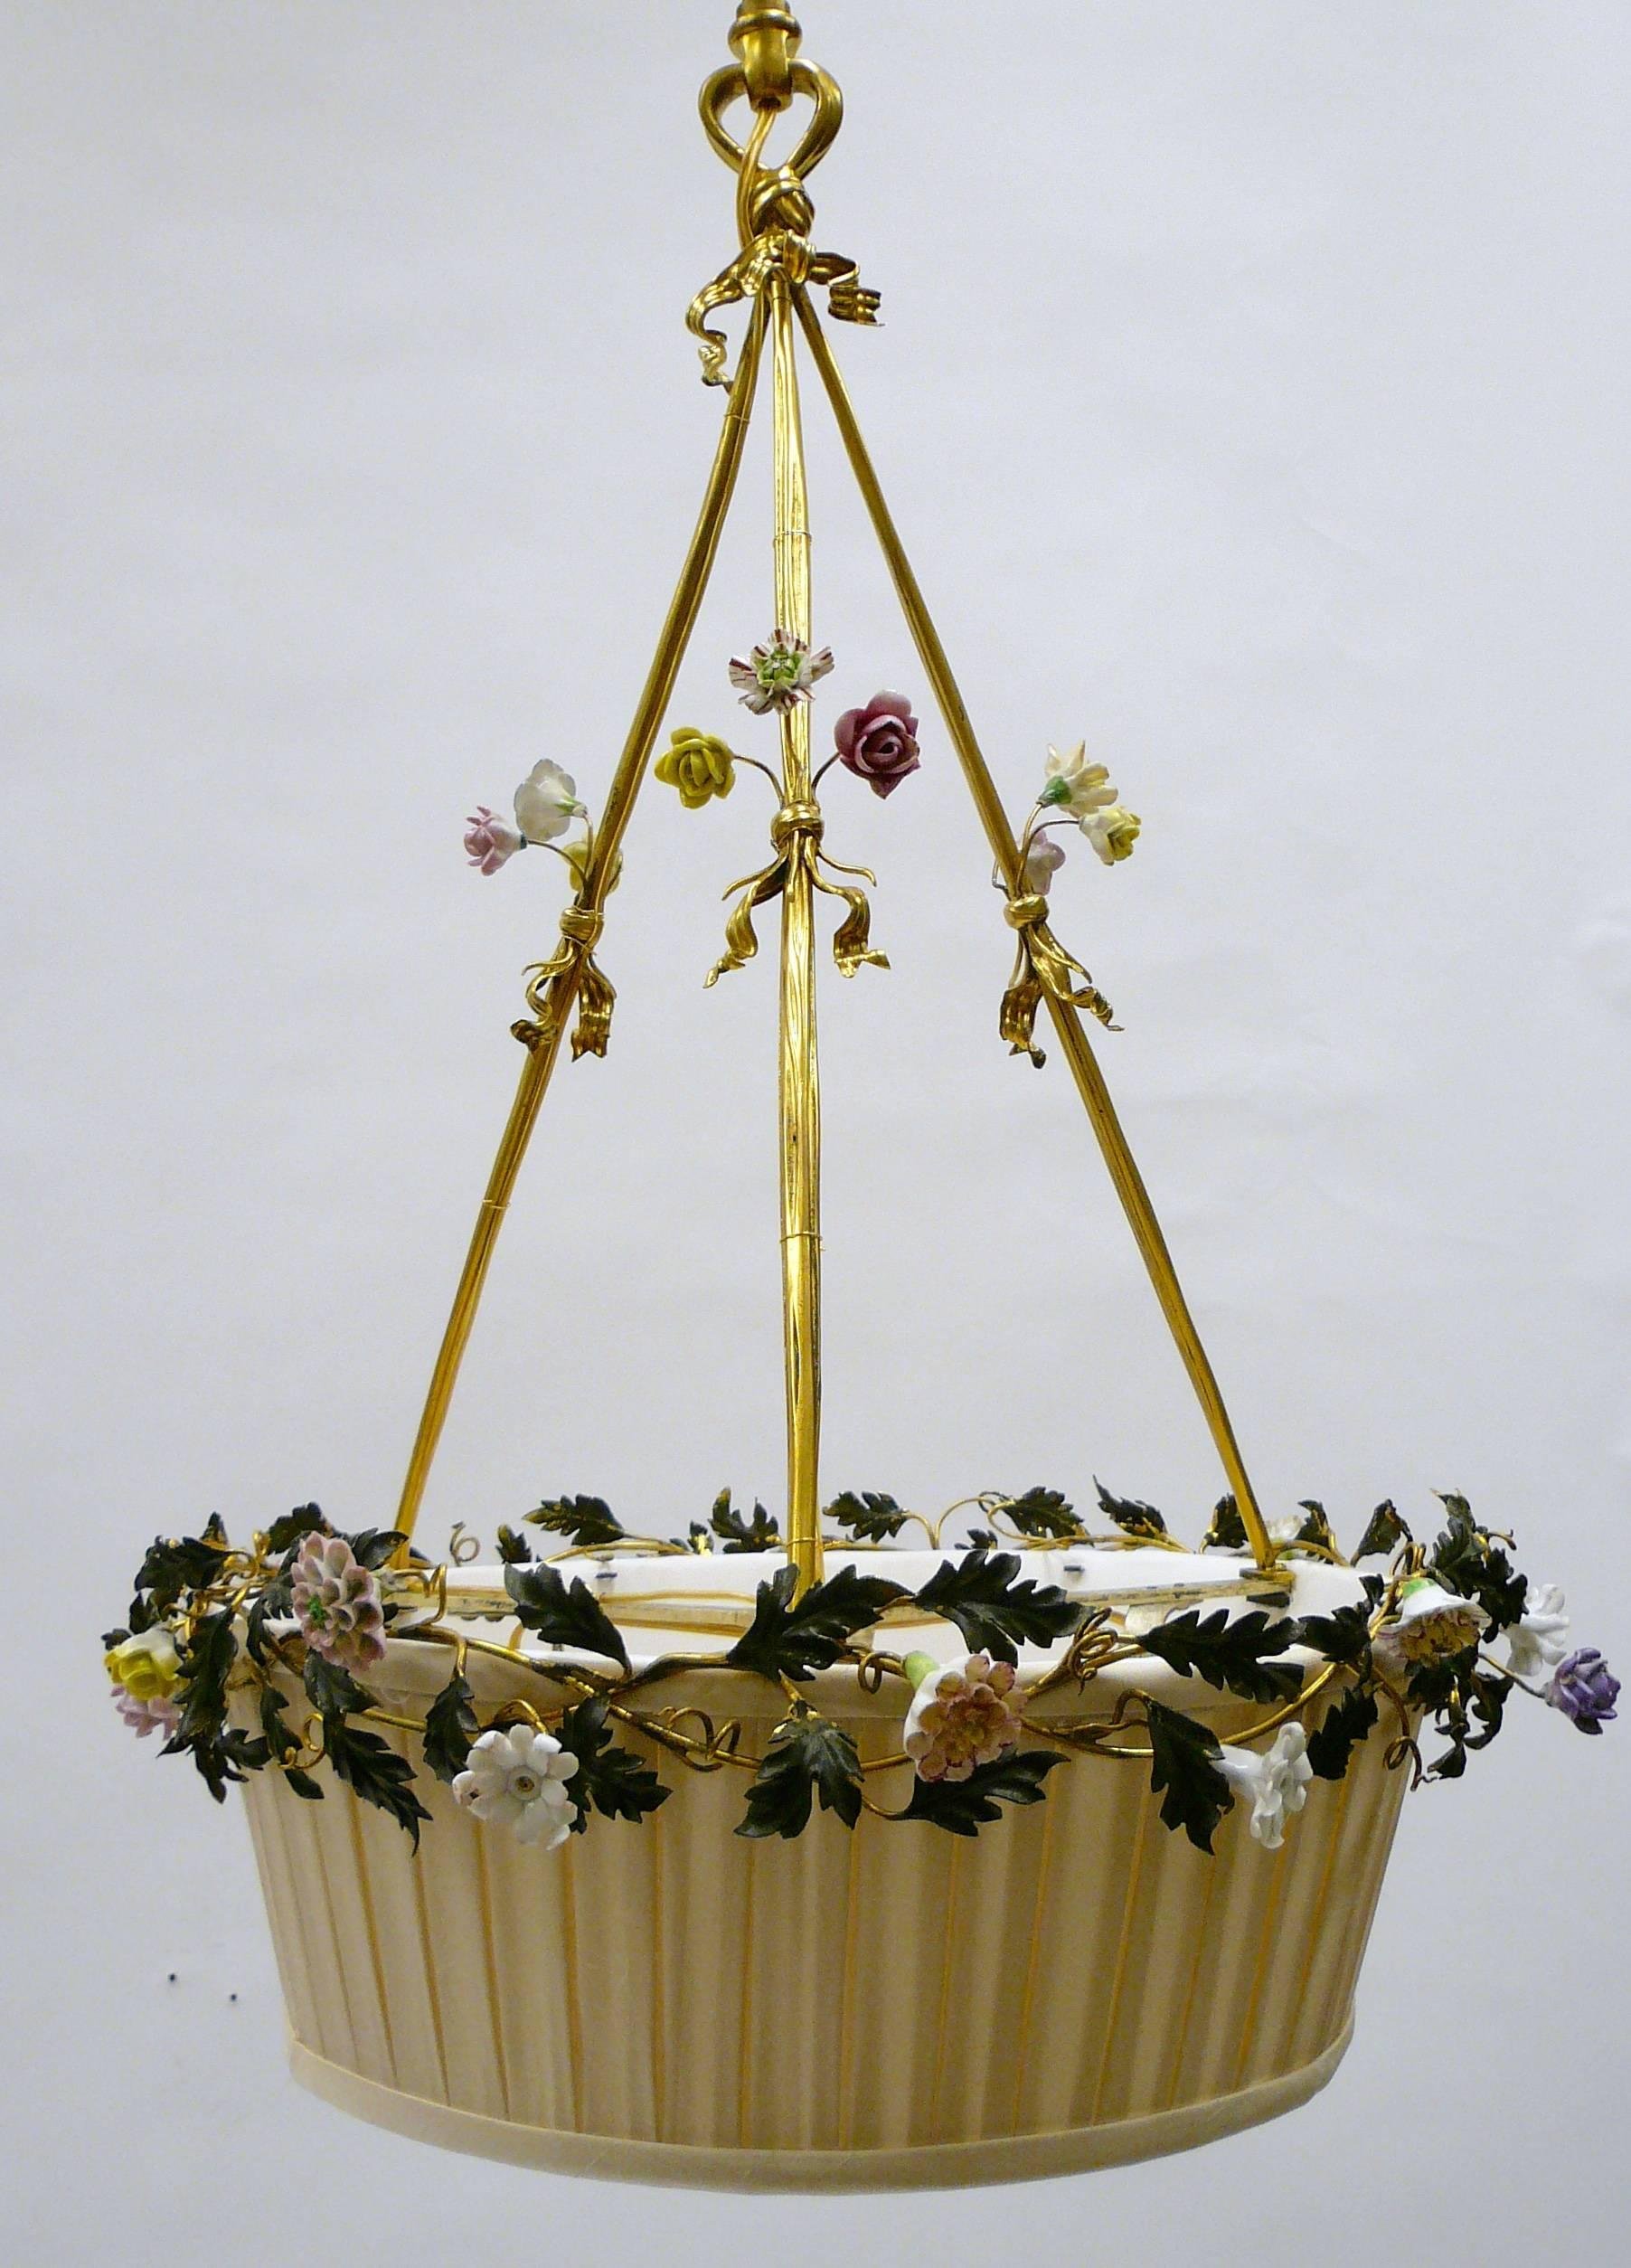 20th Century Gilt Bronze Basket Form Chandelier with Porcelain Flowers by E. F. Caldwell